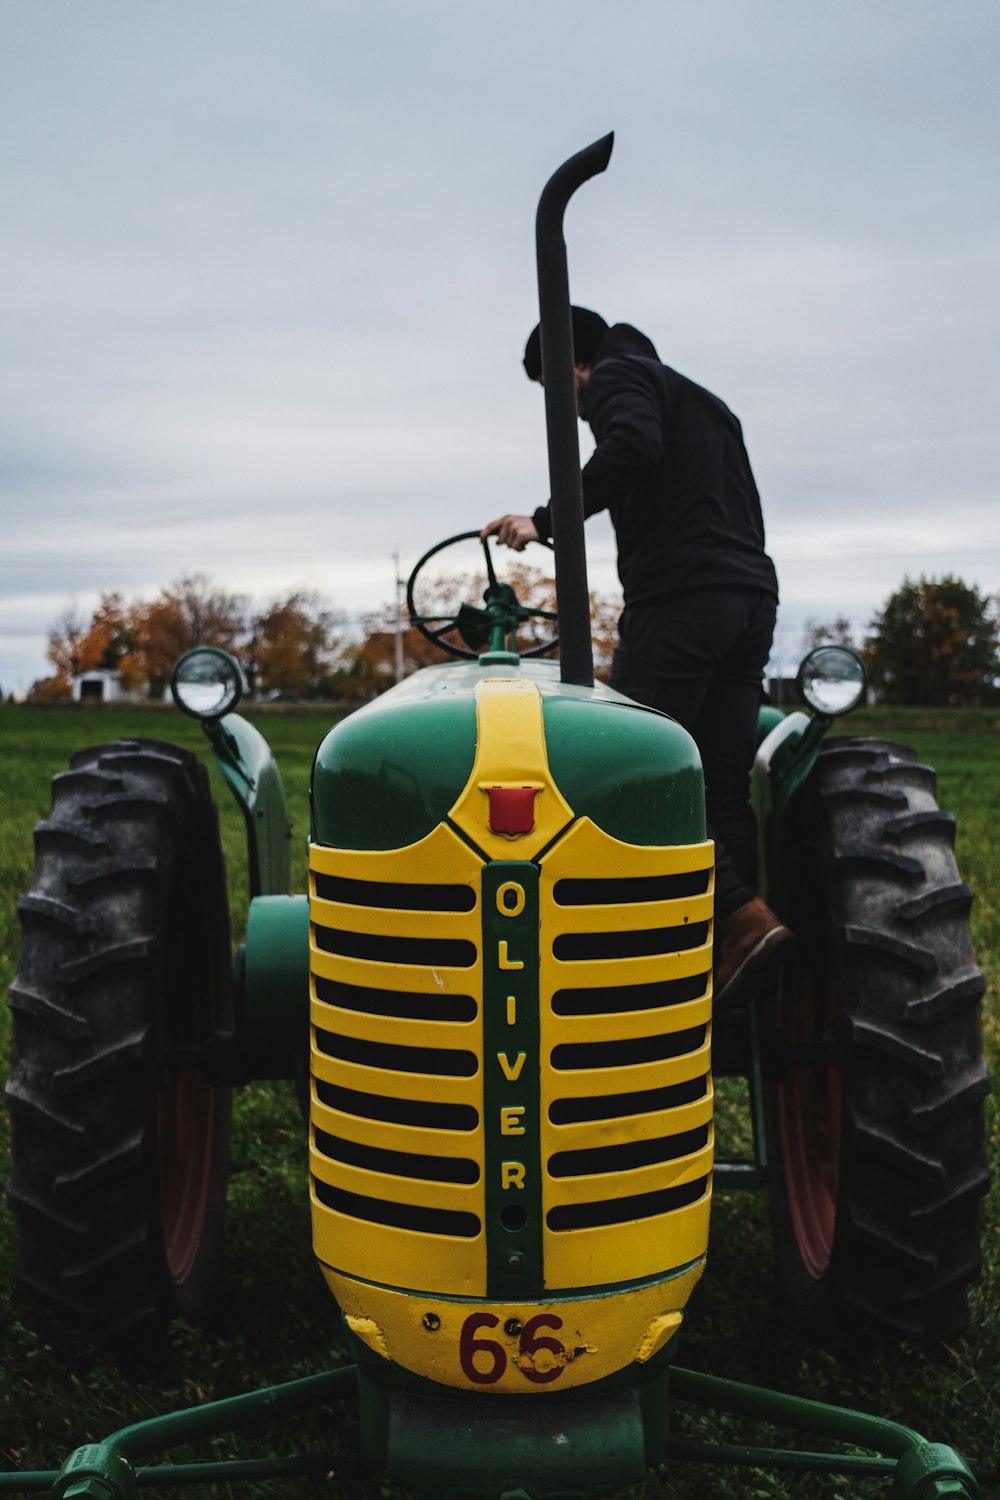 man in black jacket and pants standing on green tractor during daytime